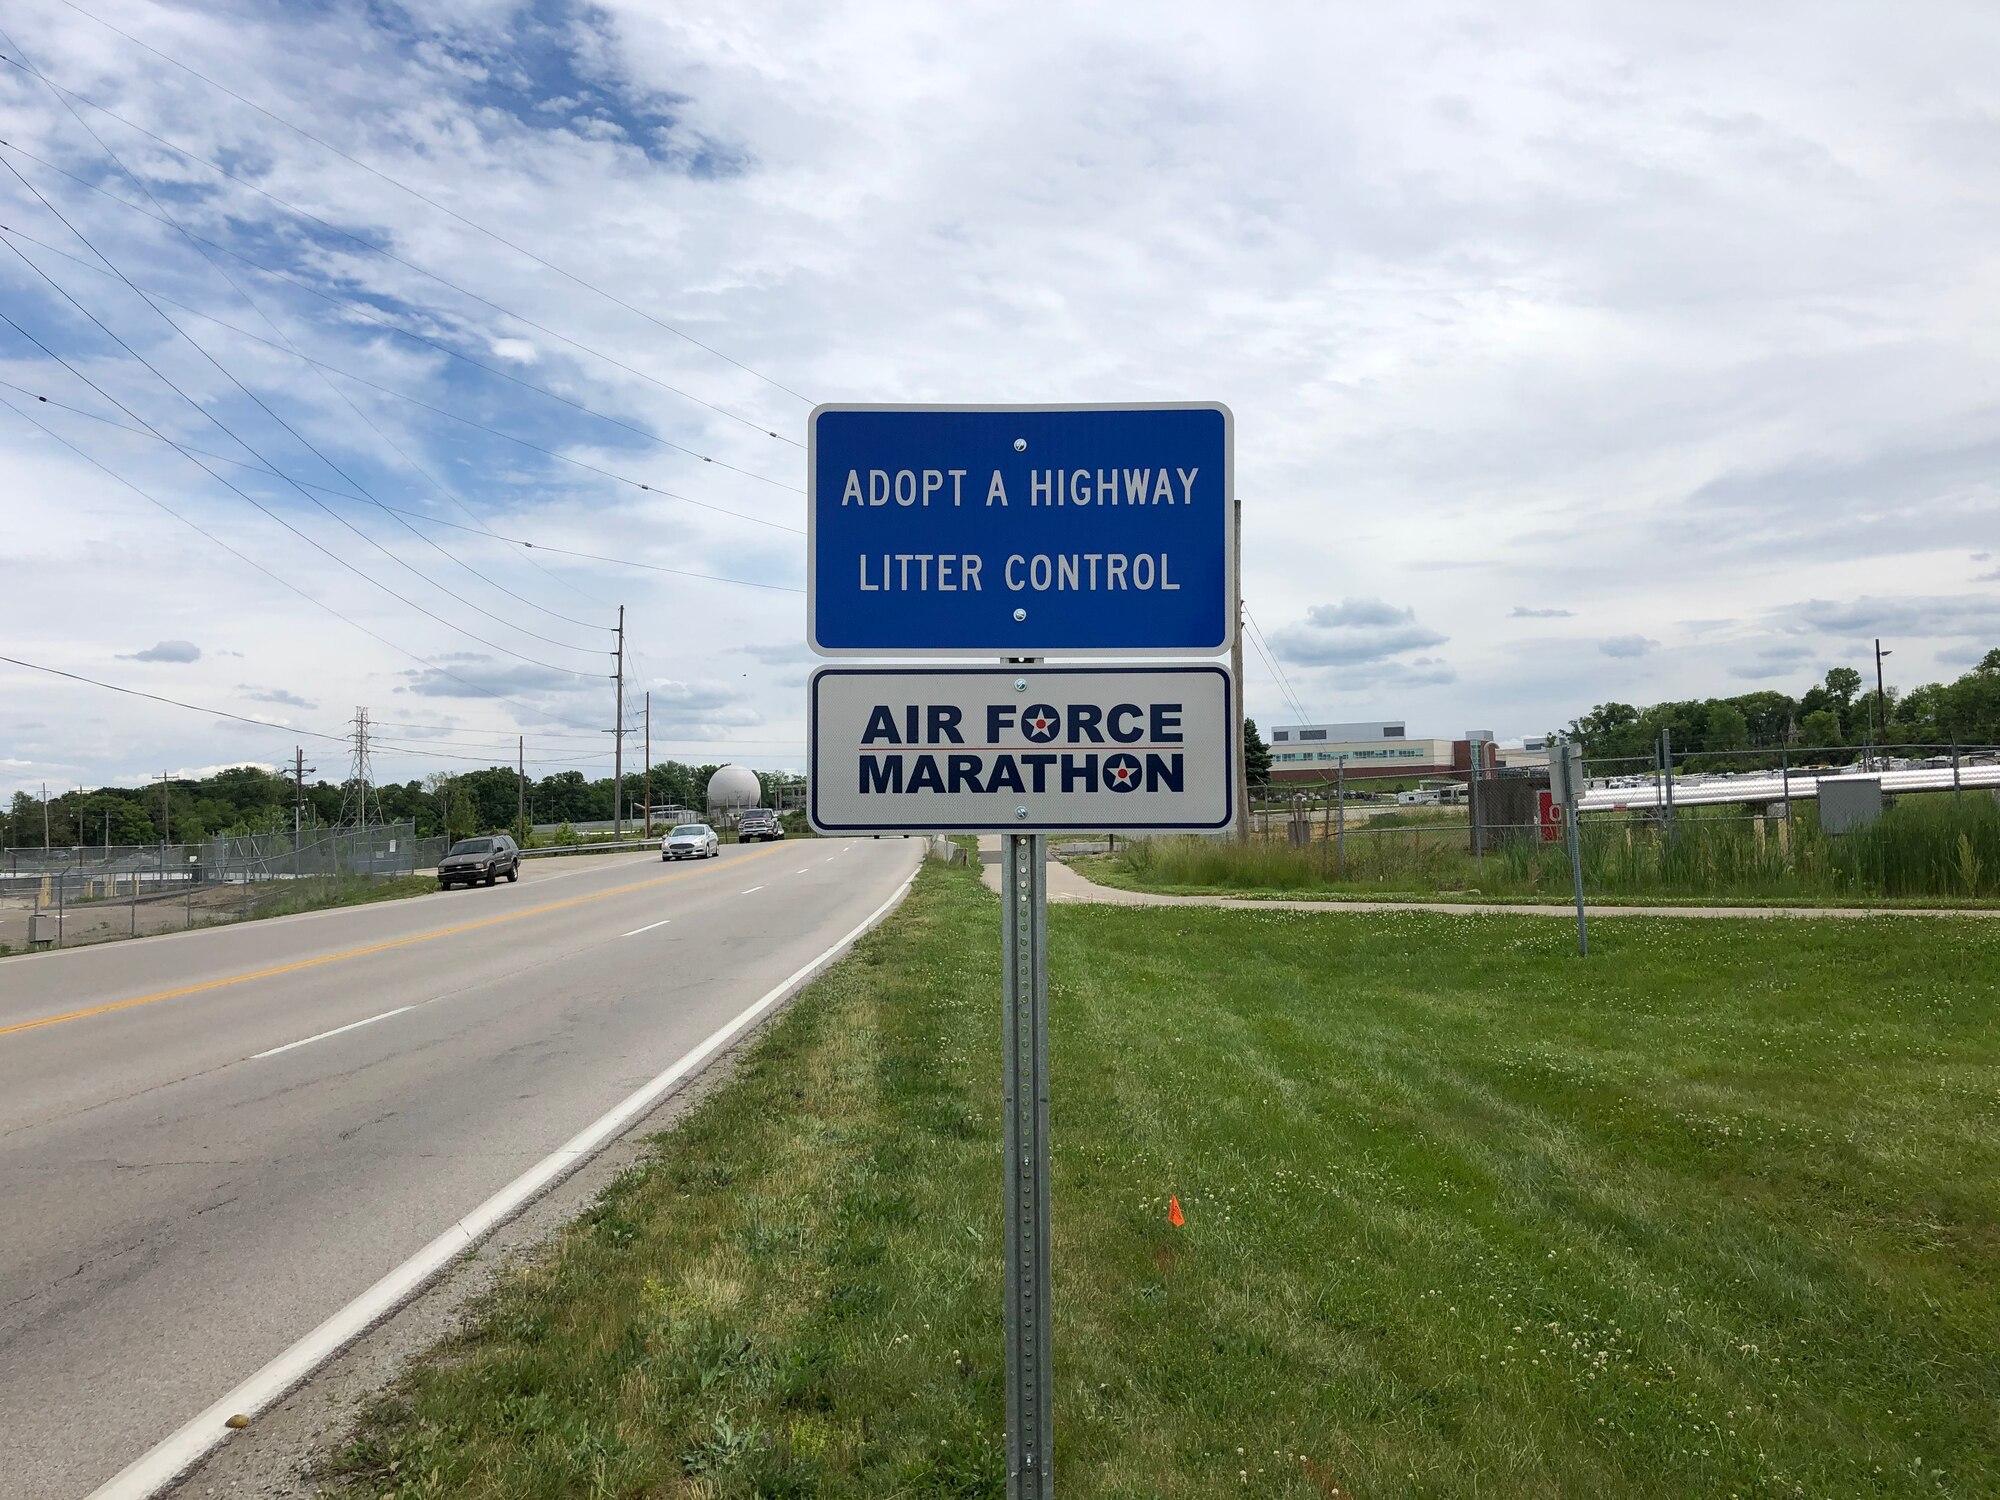 Committed to cleaning a stretch of road three times a year, the Air Force Marathon Office has adopted part of Kauffman Avenue from State Route 444 down to Wright State University.  Cleanups are planned for mid-spring, late summer and fall. CONTRIUTED PHOTO